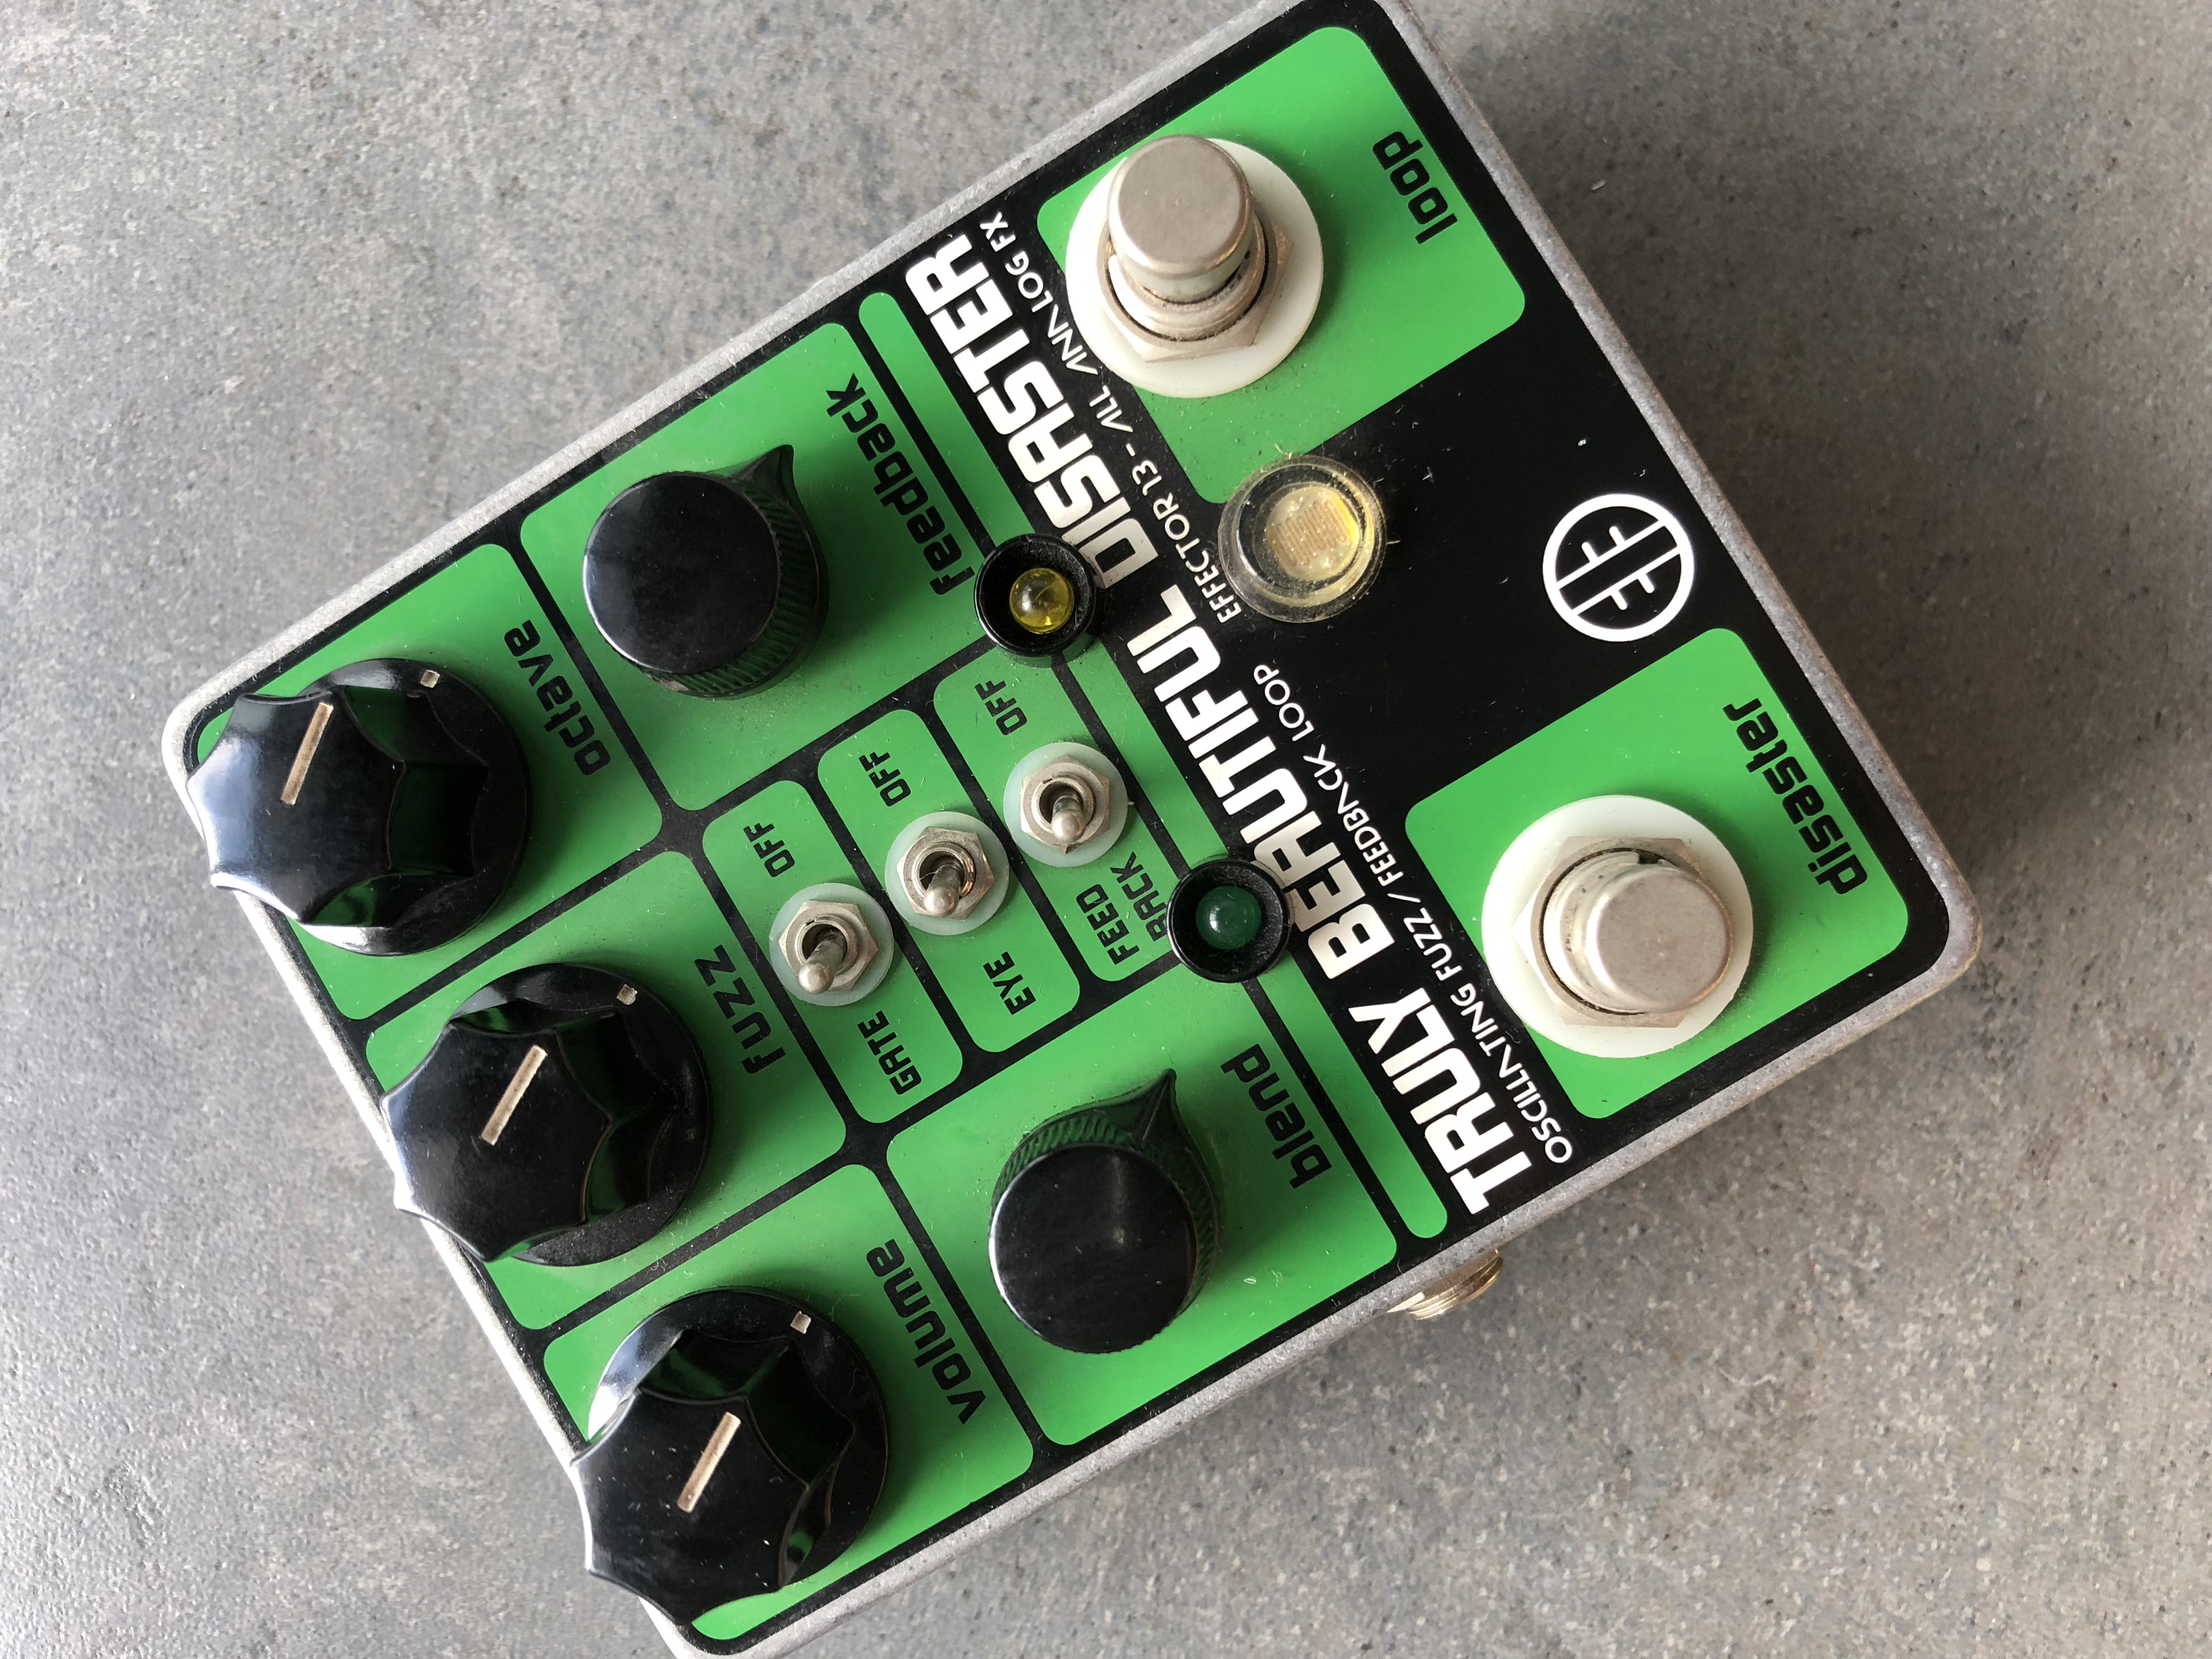 EFFECTOR 13 TRULY BEAUTIFUL DISASTER Guitar Bass Effects Pedal Rare